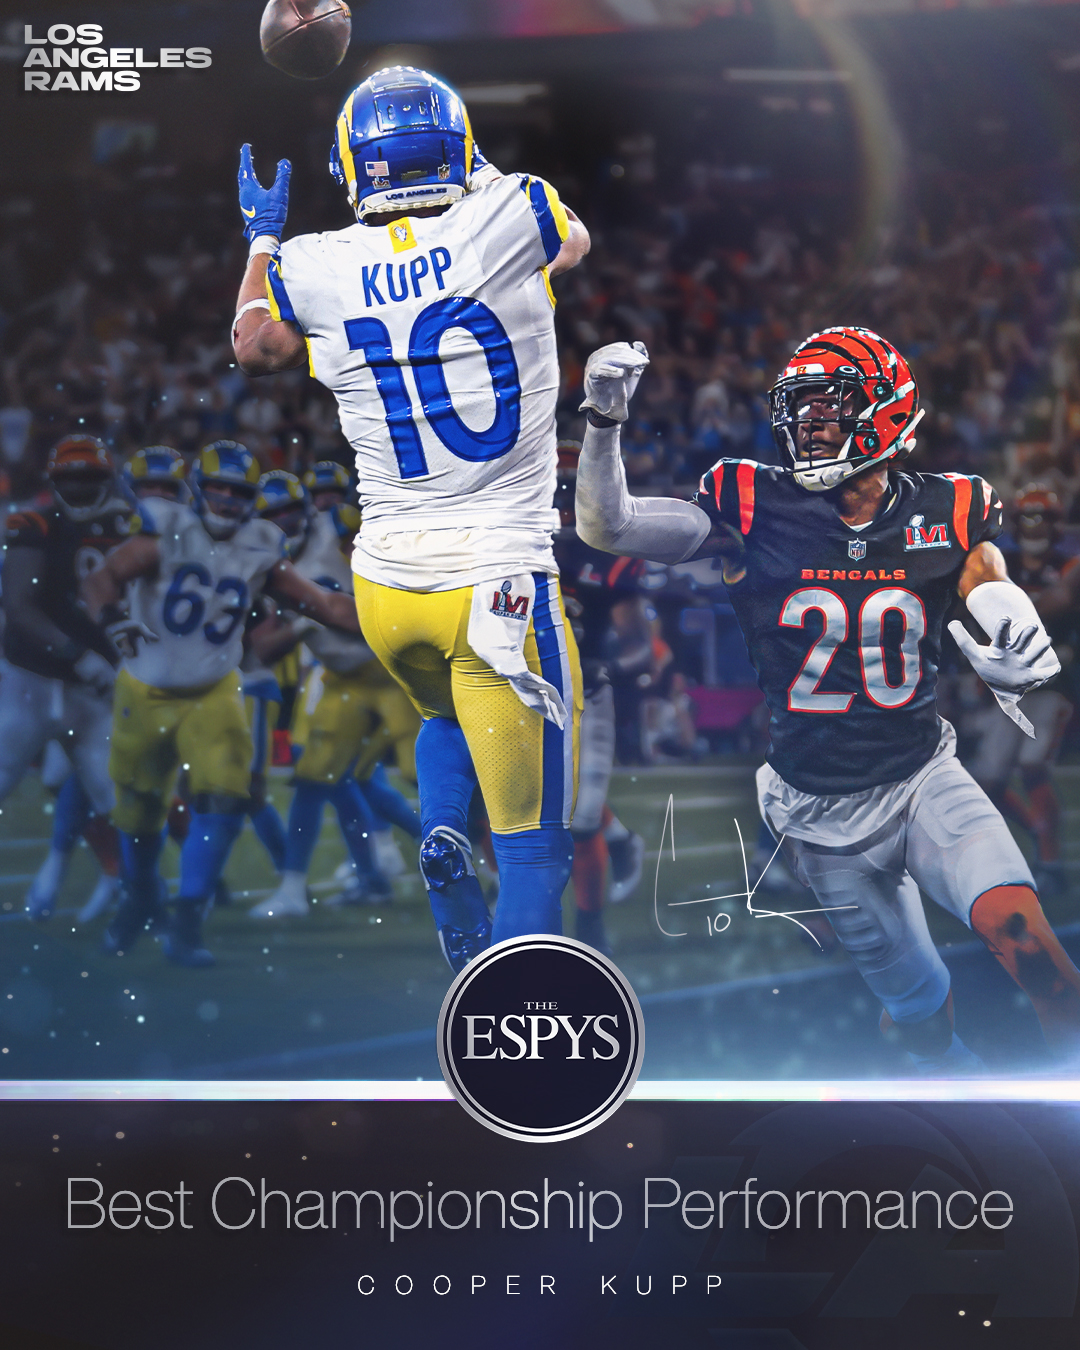 Los Angeles Rams on X: 'IF IT'S UPP, THEN IT'S KUPP! The ESPY for Best  Championship Performance goes to @CooperKupp! 